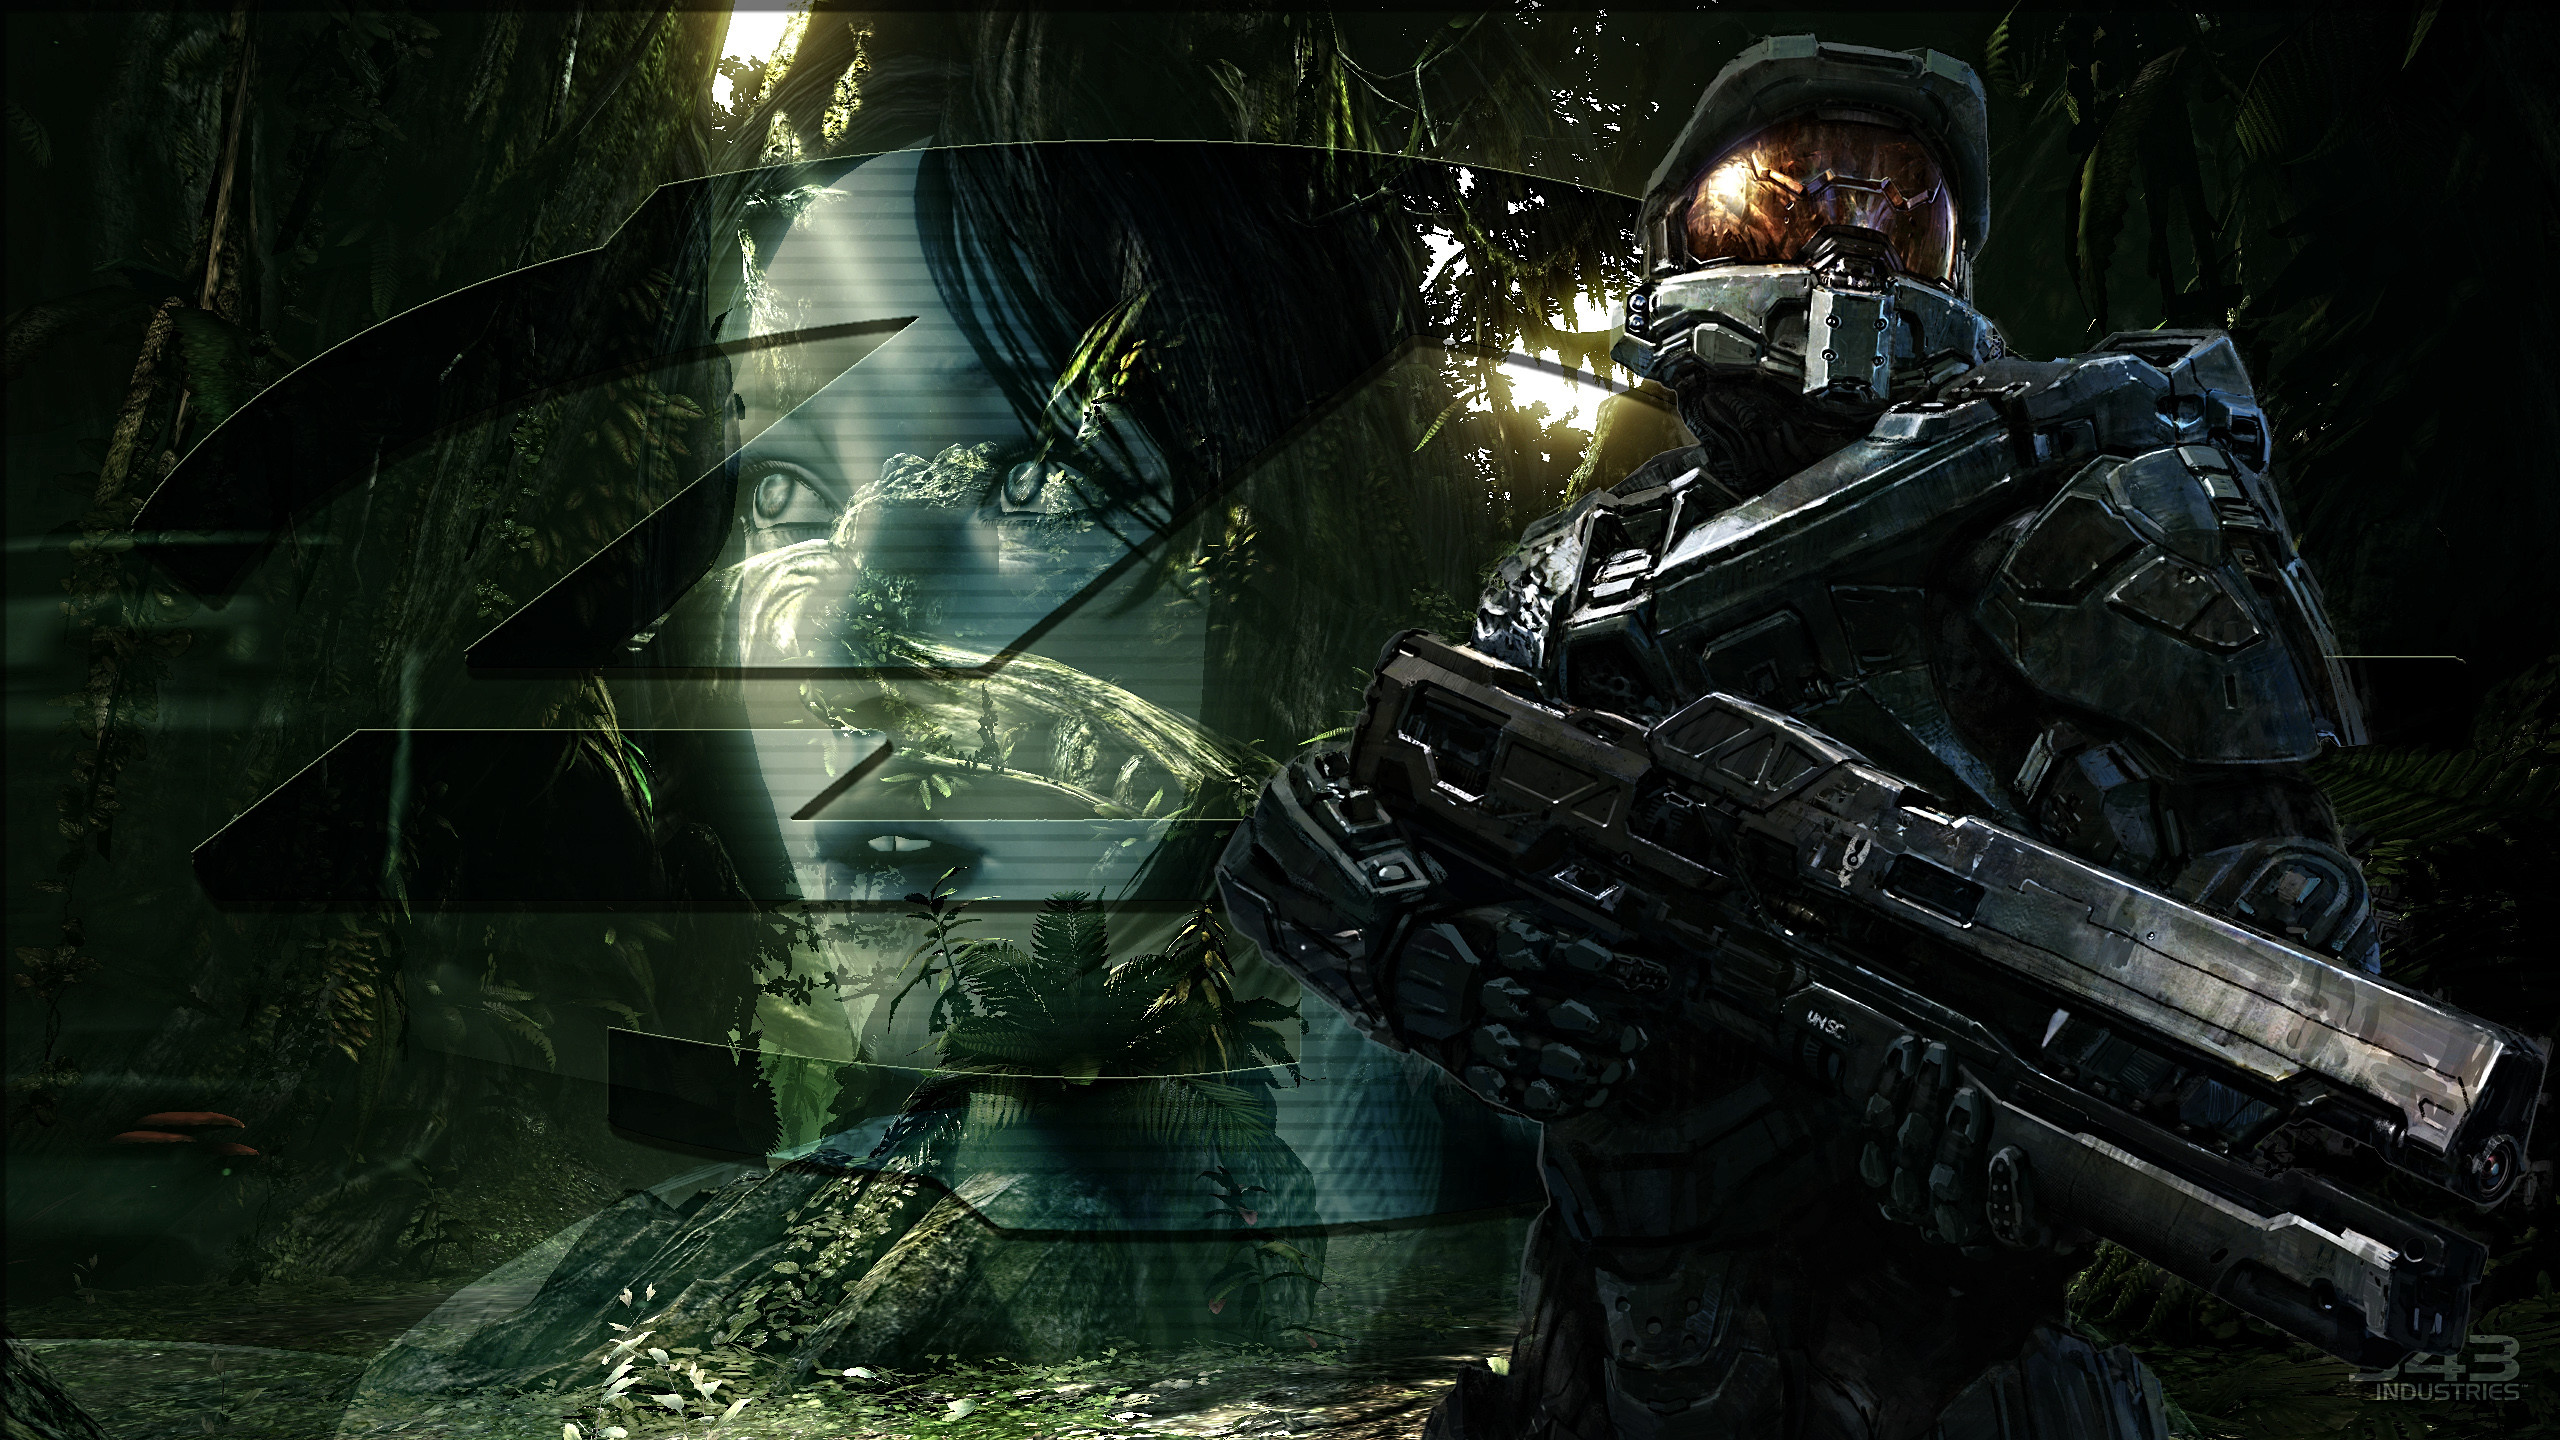 2560x1440 Search Results for “halo 4 wallpaper – Adorable Wallpapers